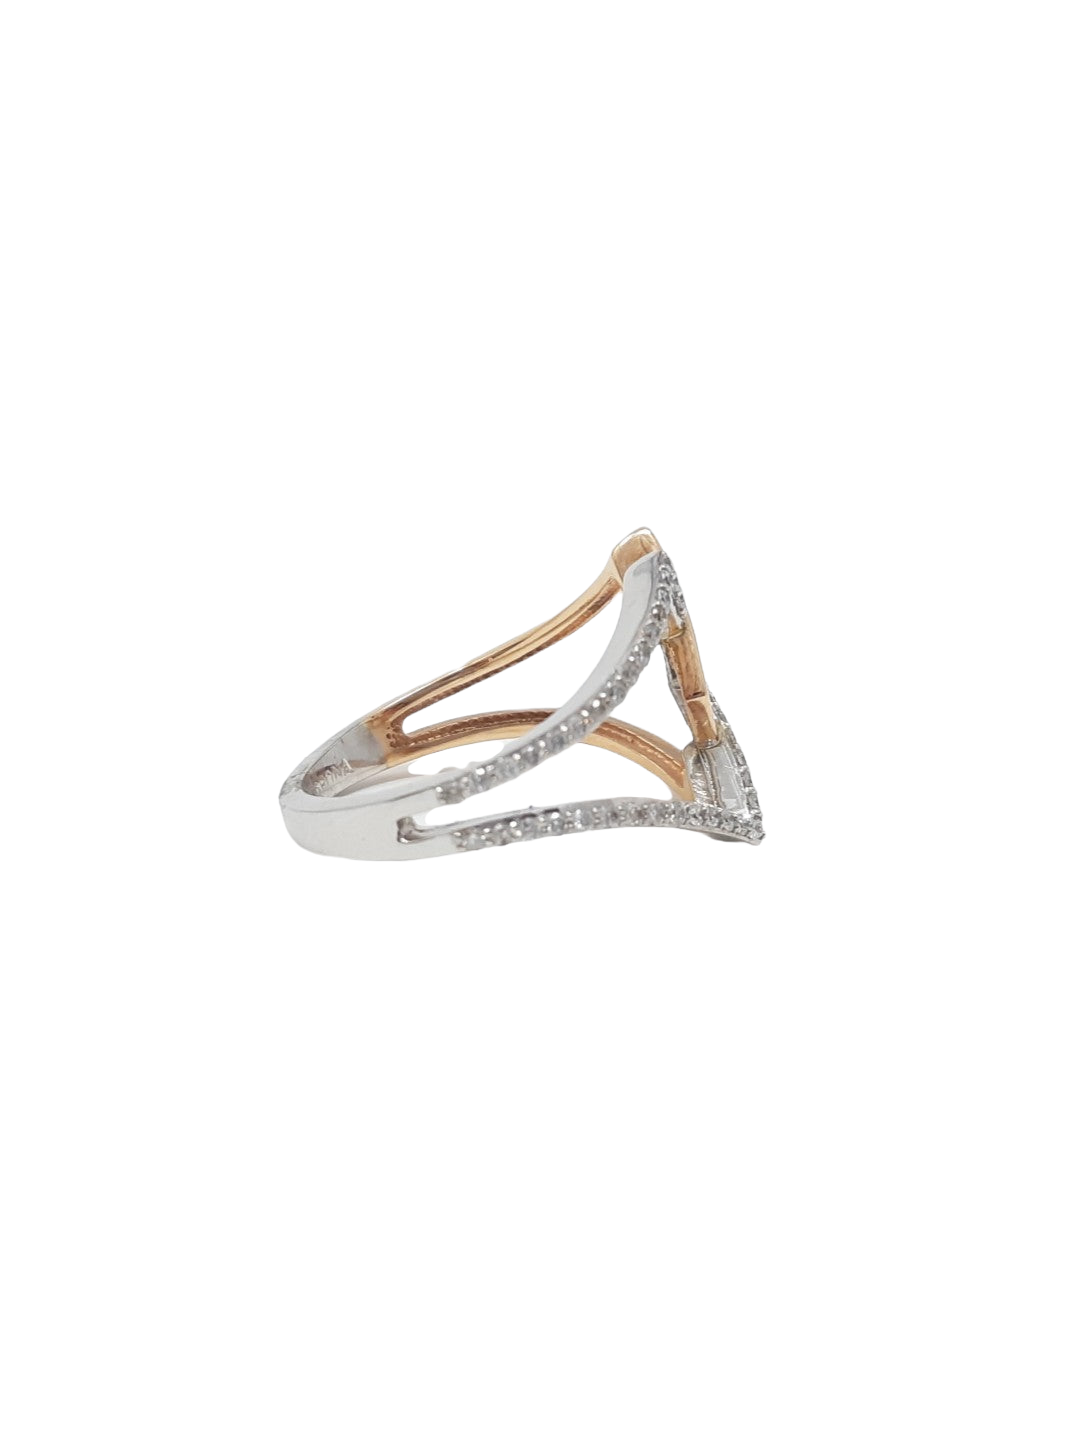 10K White and Rose Gold 0.20cttw Diamond Ring, Size 6.5